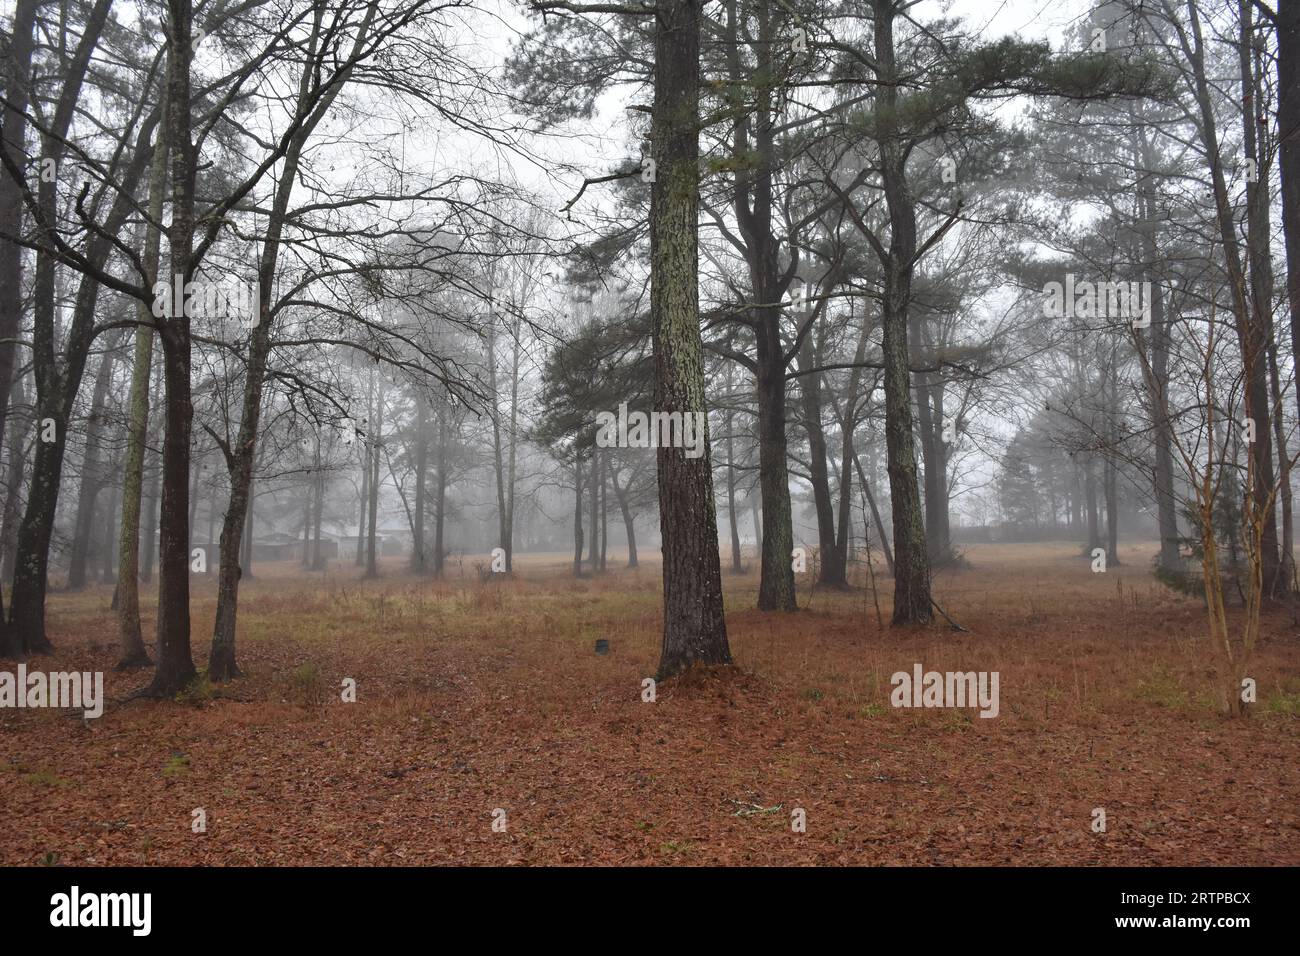 A Foggy scene in the woods. Stock Photo